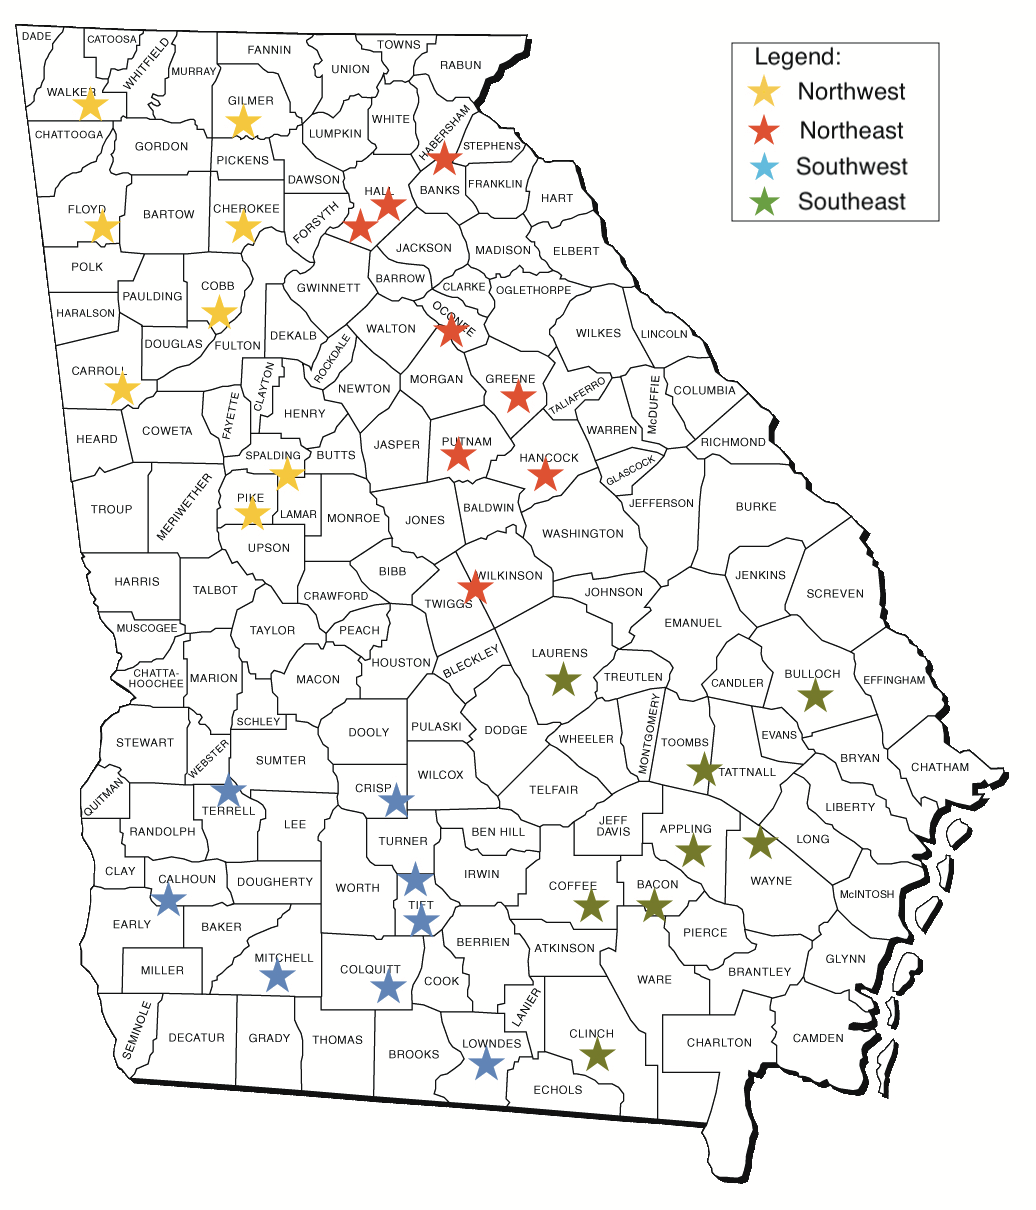 Map of Georgia with stars throughout the state marking weather stations. The stars are colored by the region of the state the station is in - northwest, northeast, southwest, and southeast.